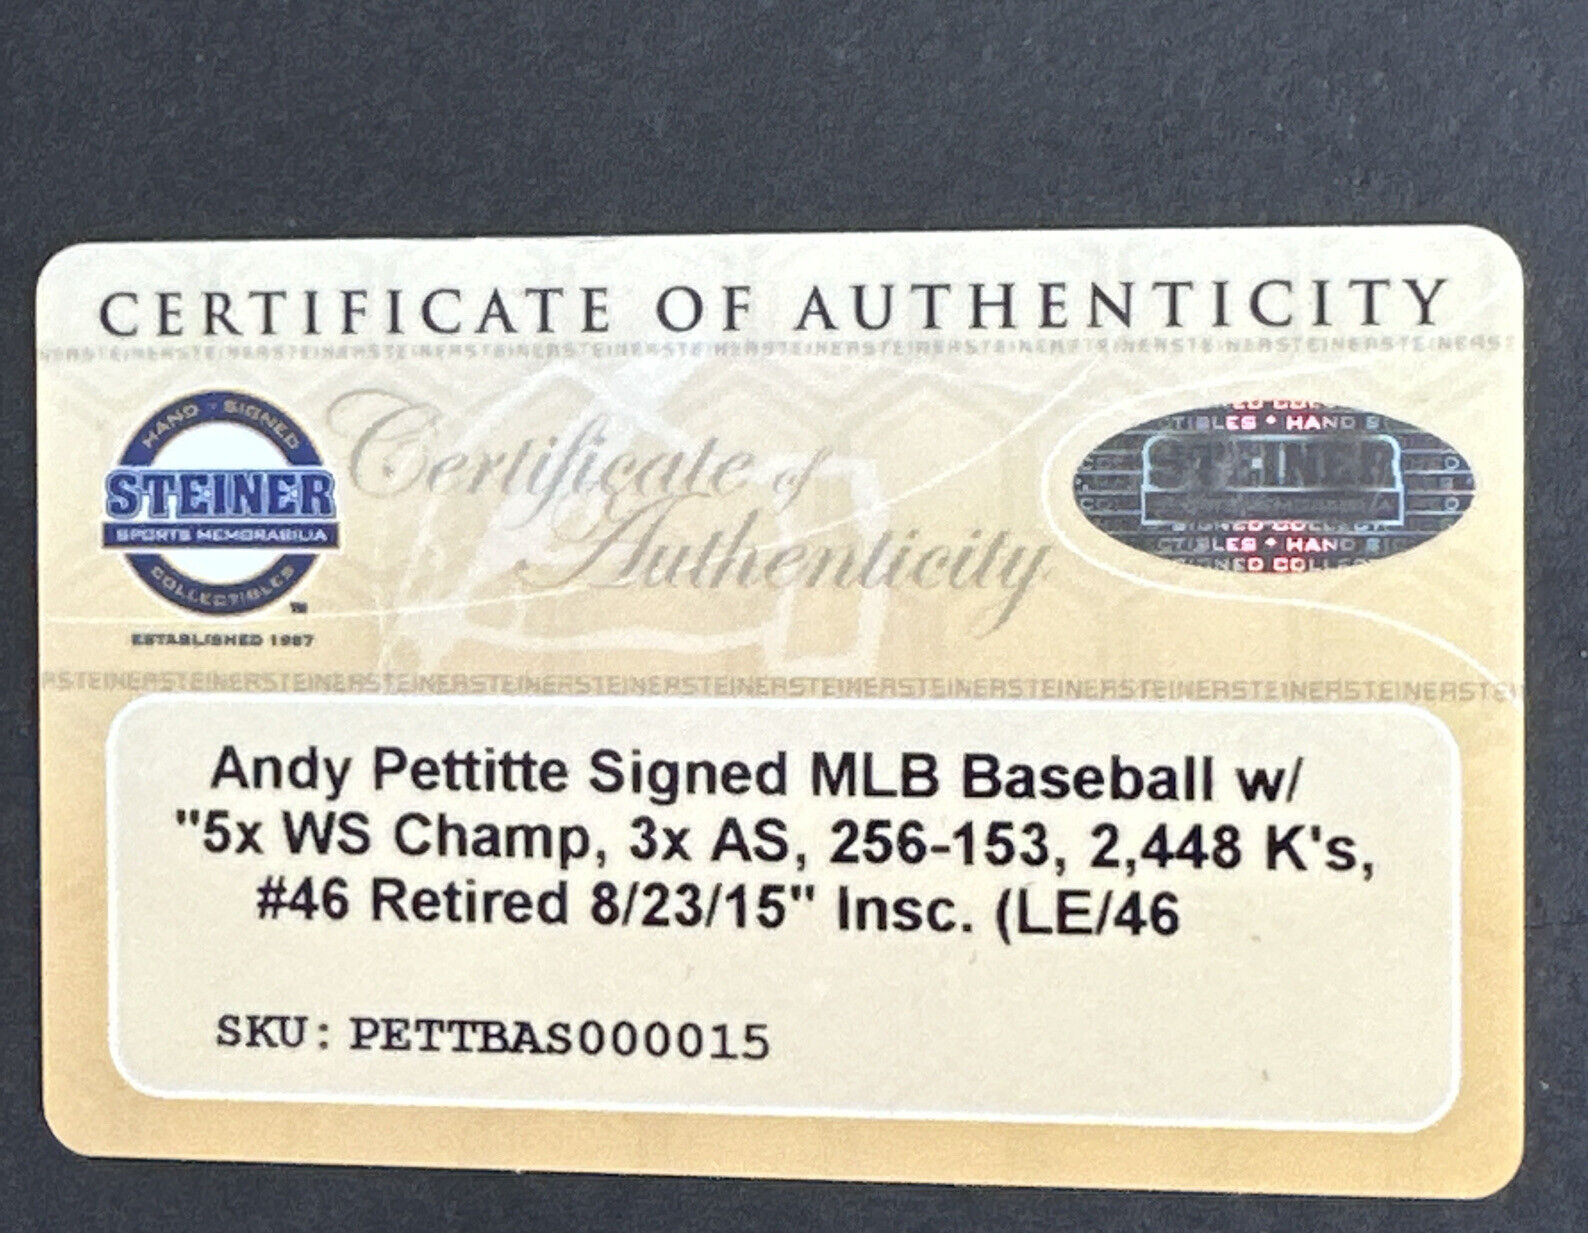 Andy Pettitte Memorabilia, Andy Pettitte Collectibles, MLB Andy